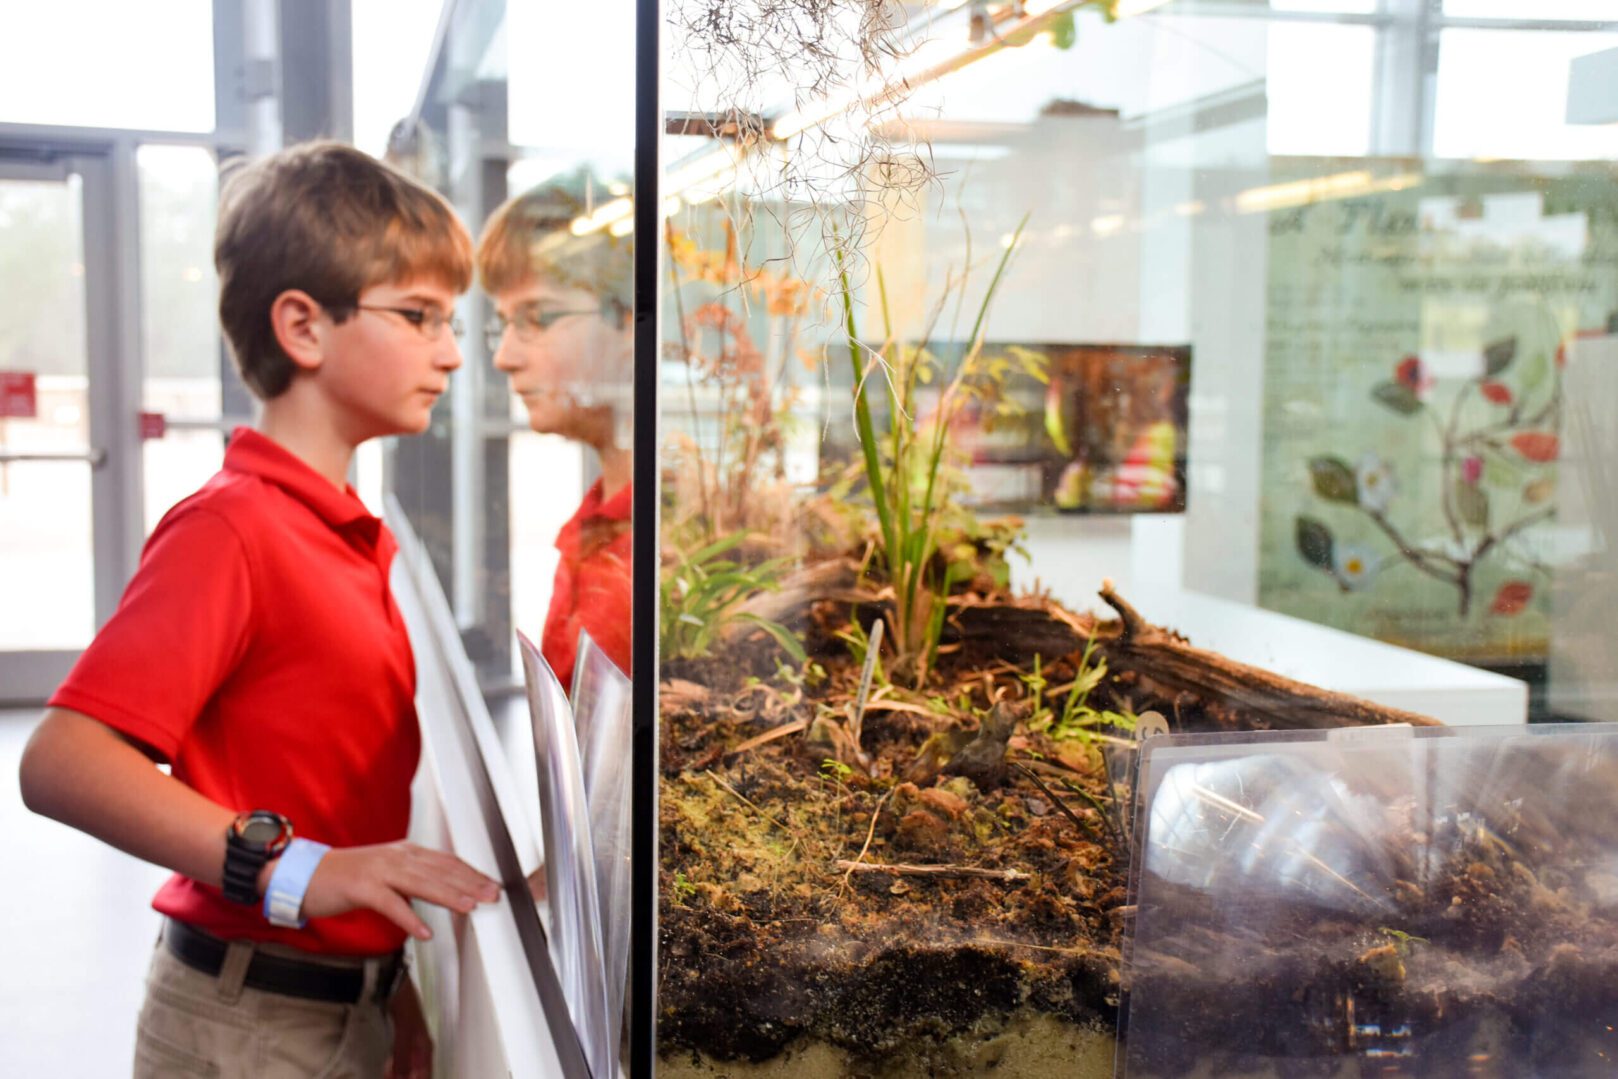 A boy is looking at a display of plants in a glass case.